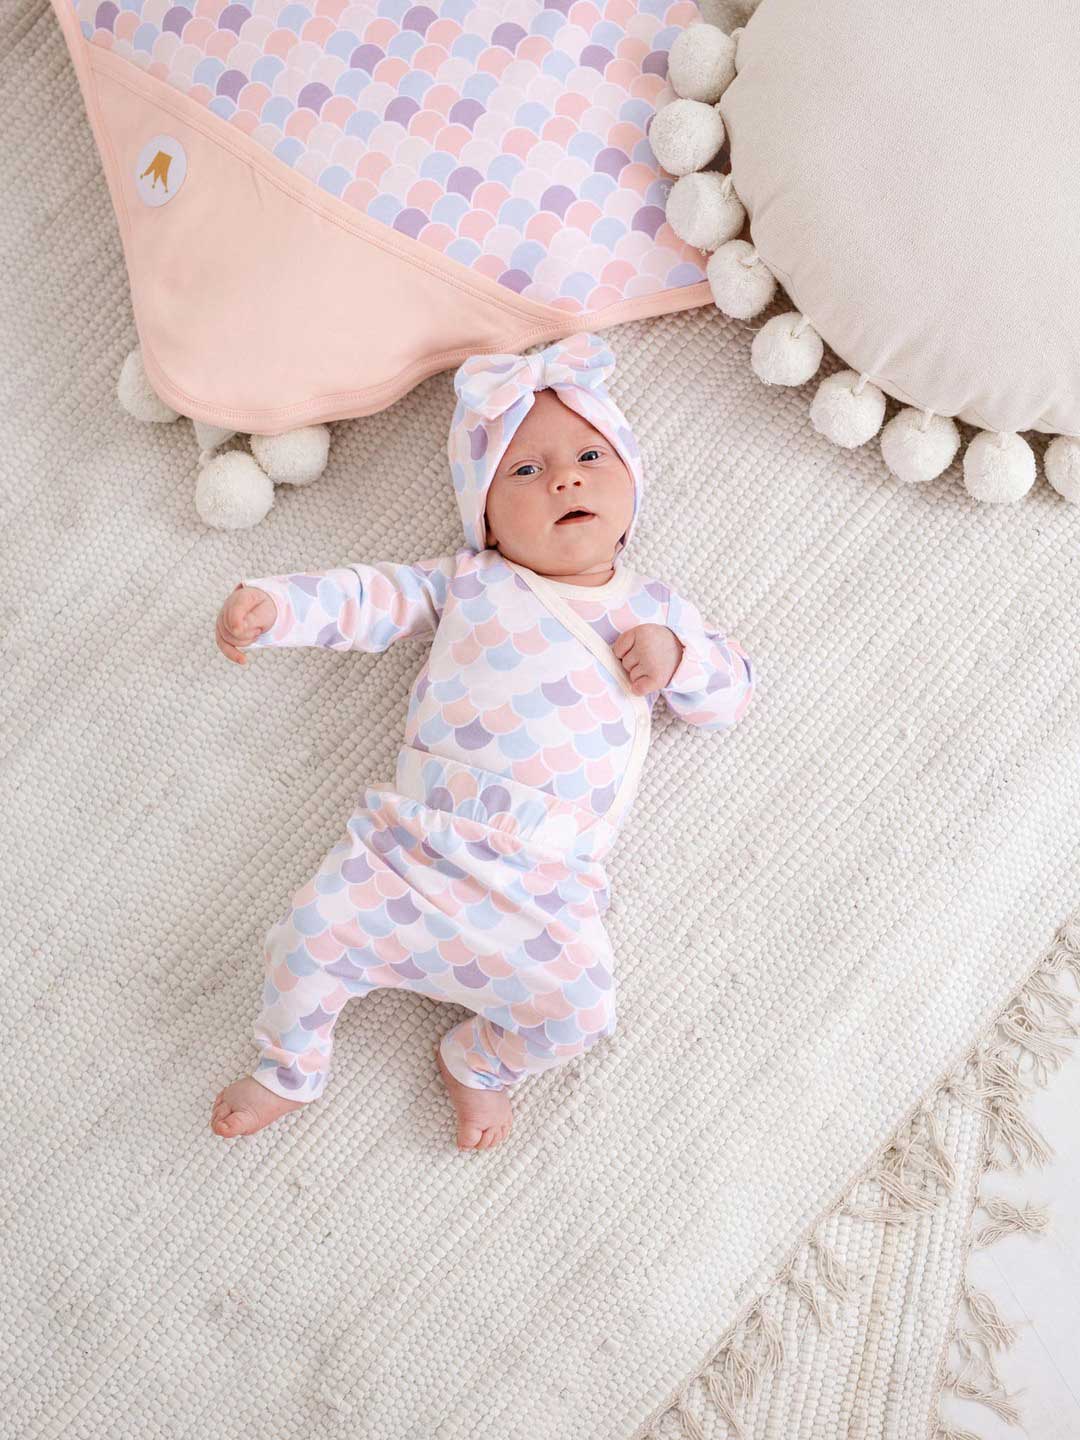 With a unique bear and bunny design pattern perfect for both boys or girls, Infant Bodysuit Gold Fish 301 comes in 7 sizes - 50/56/62/68/74/80/86 and fastens securely with buttons at the back or side (kimono style). 